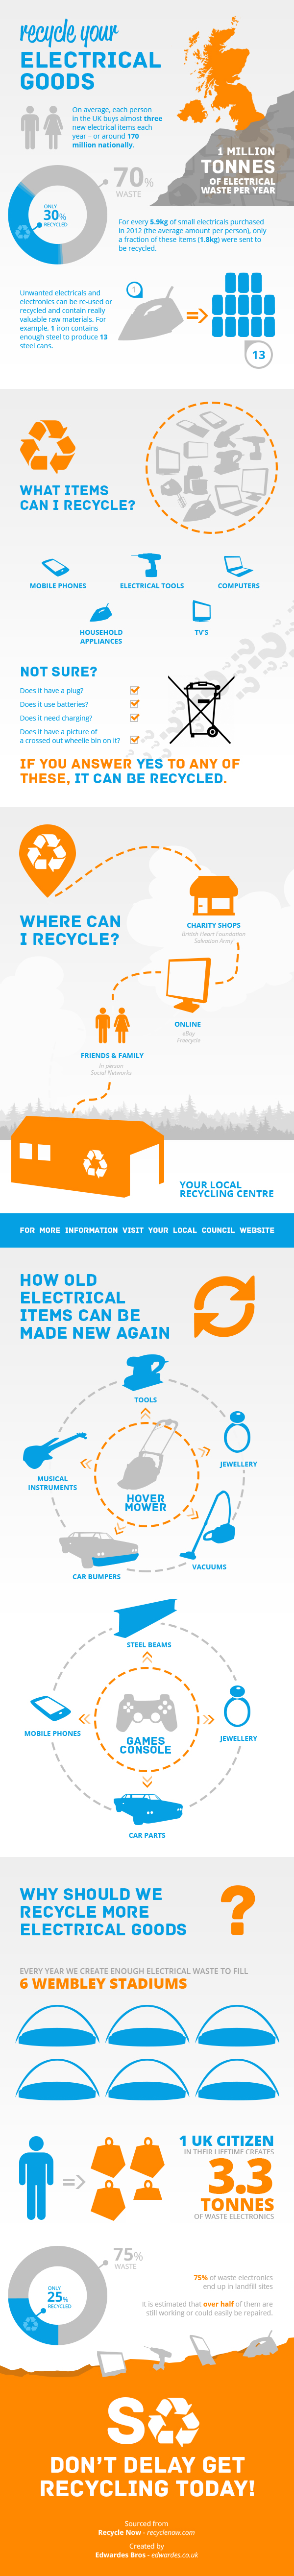 Recycle Your Electrical Goods Infographic